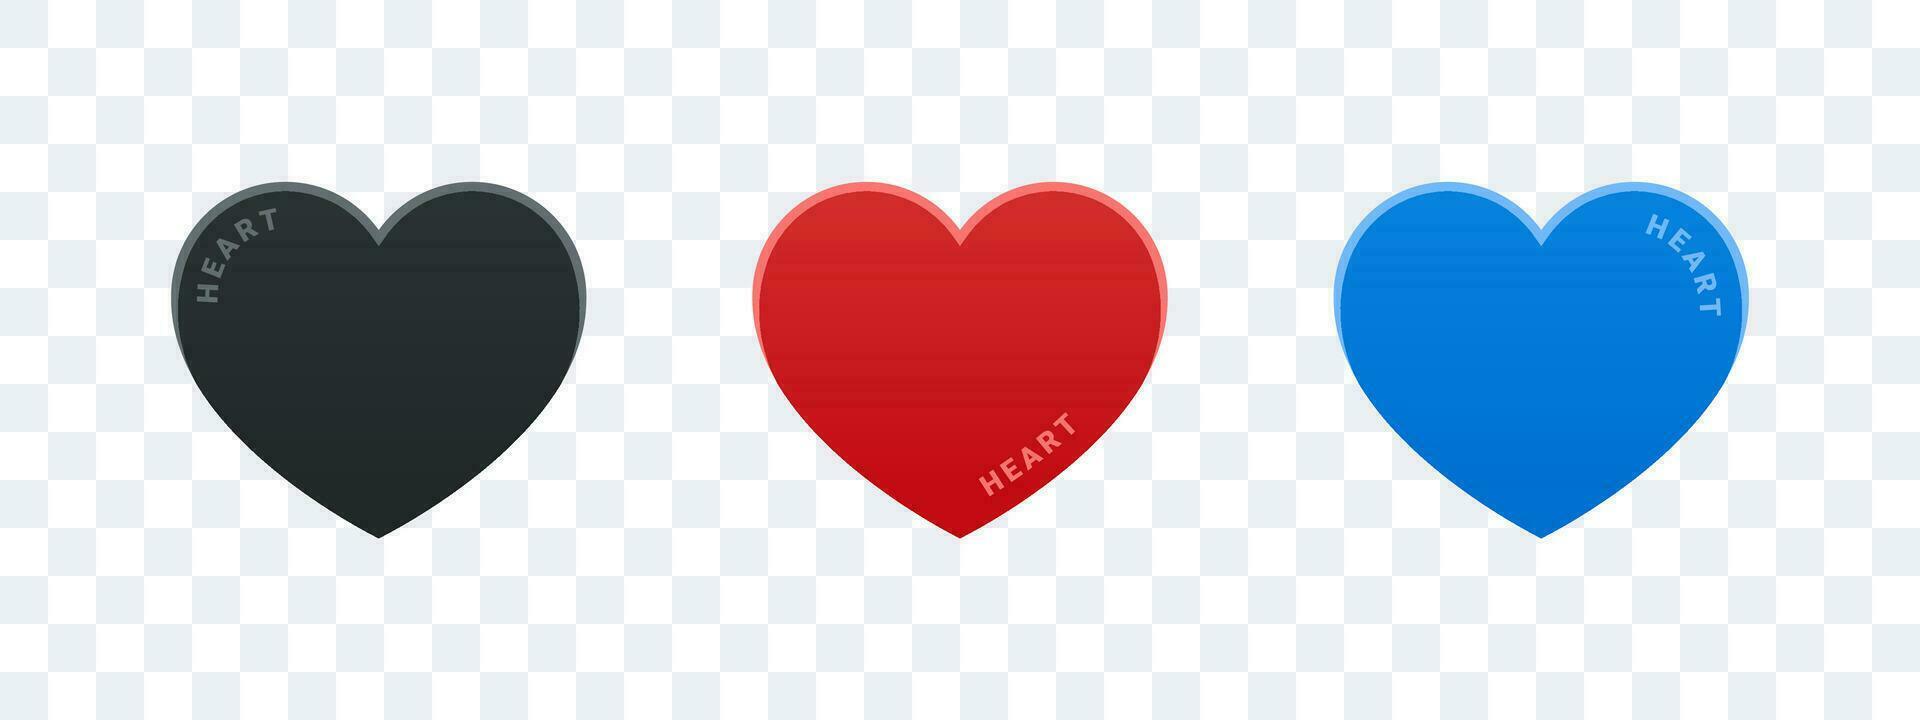 Heart icons. Black, red and blue heart icons. Vector scalable graphics